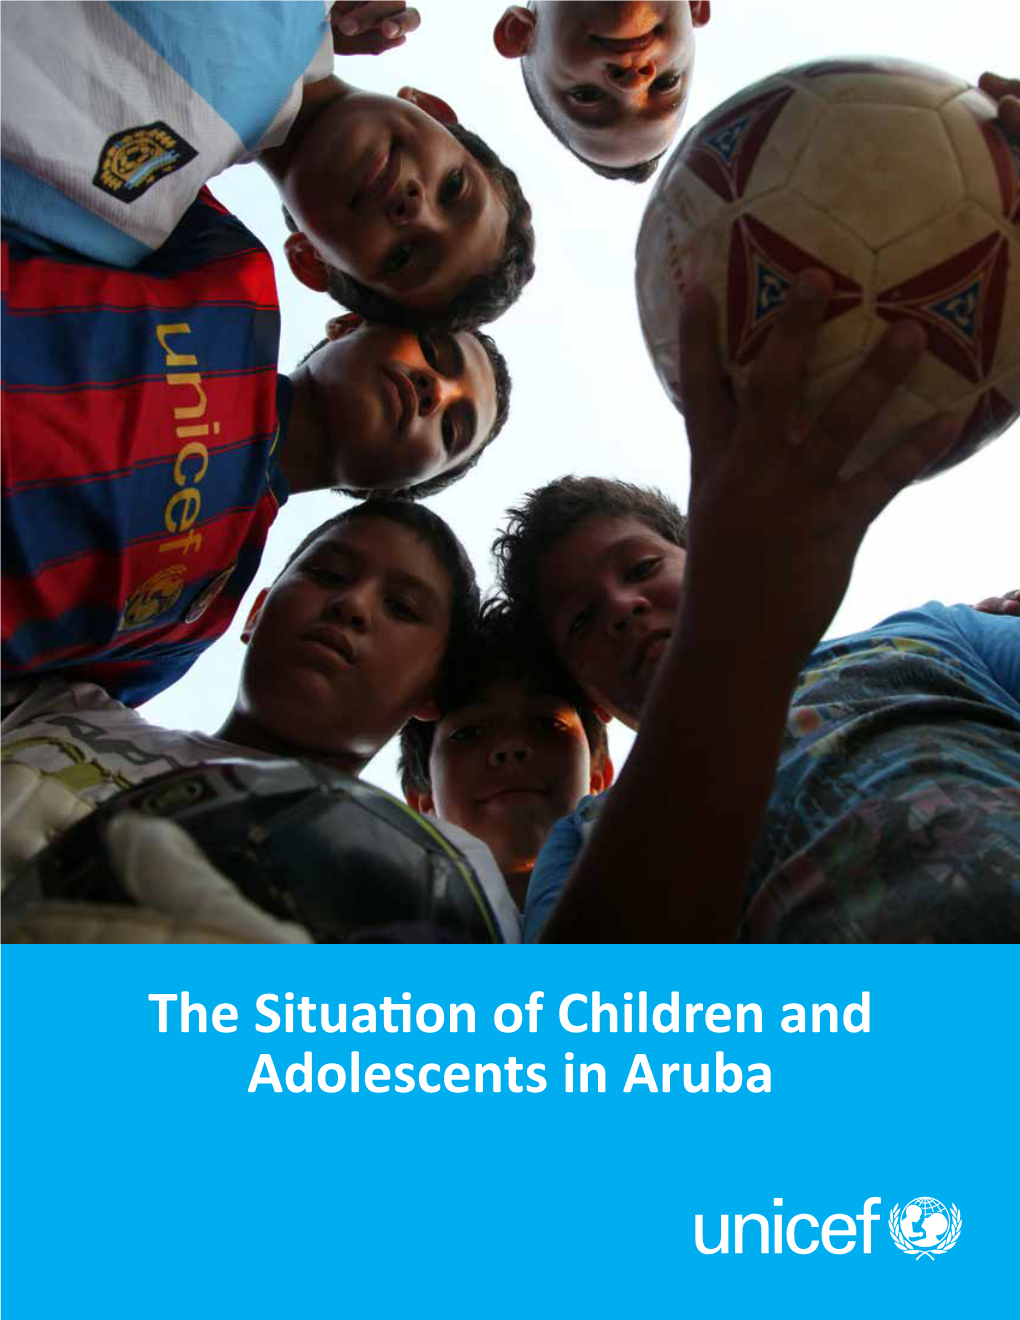 The Situation of Children and Adolescents in Aruba © United Nations Children’S Fund (UNICEF), 2013 Cover/Back Cover Photo Credits © UNICEF/UNI119868/Lemoyne